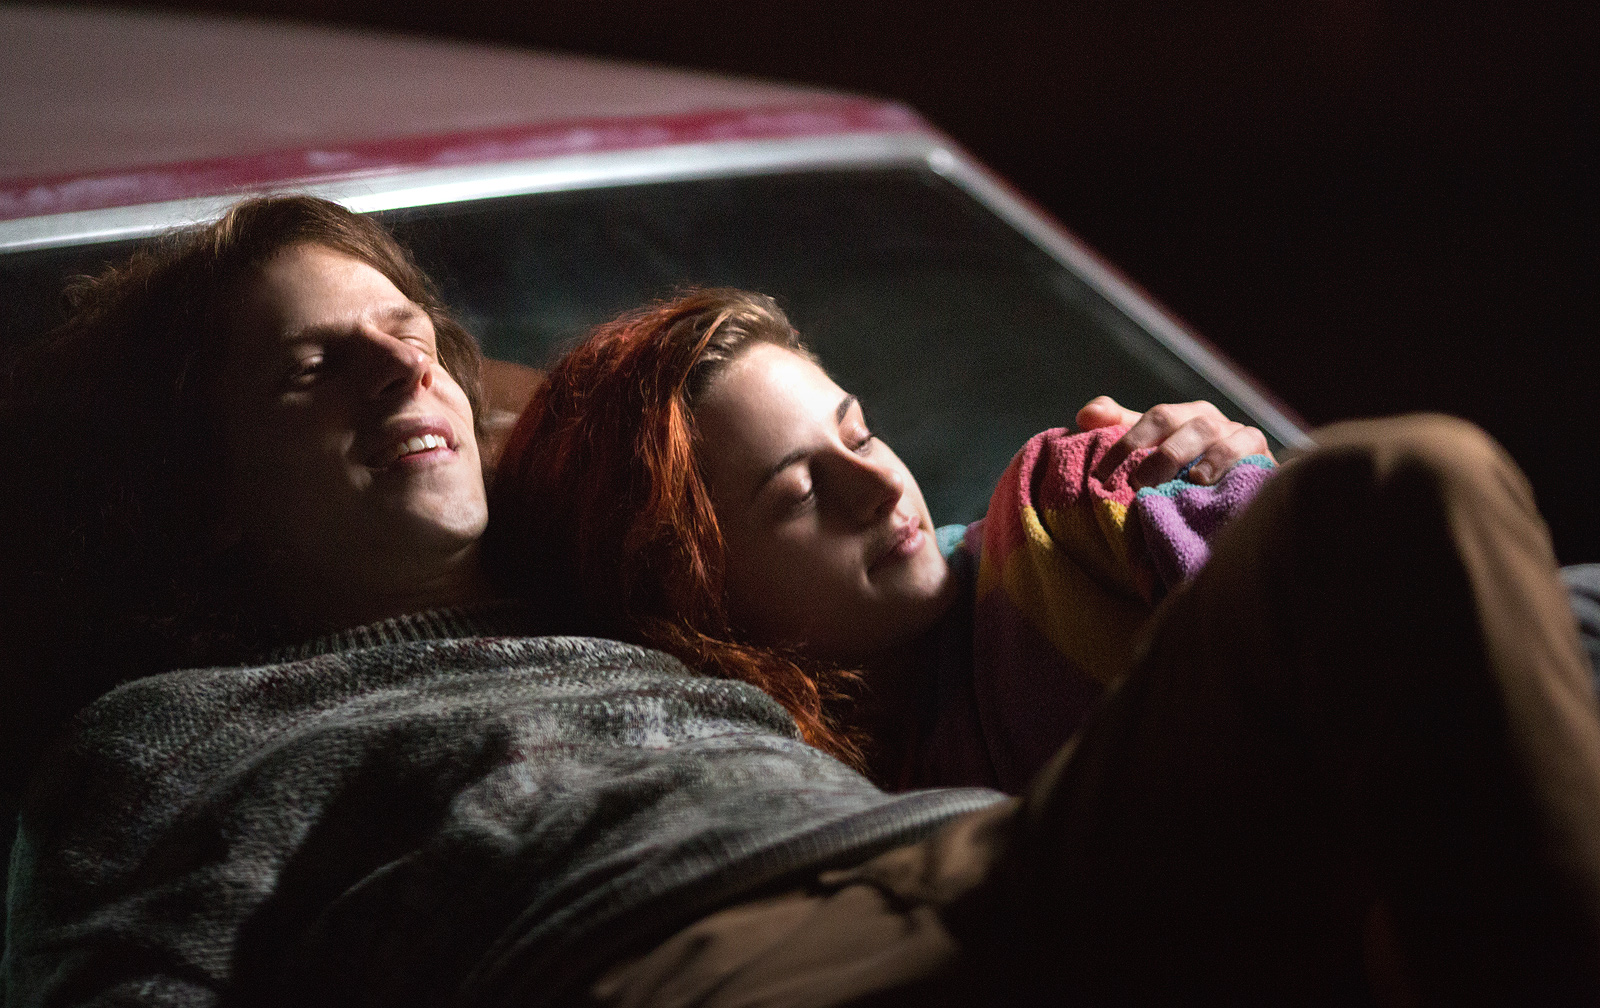 American Ultra High Quality Background on Wallpapers Vista